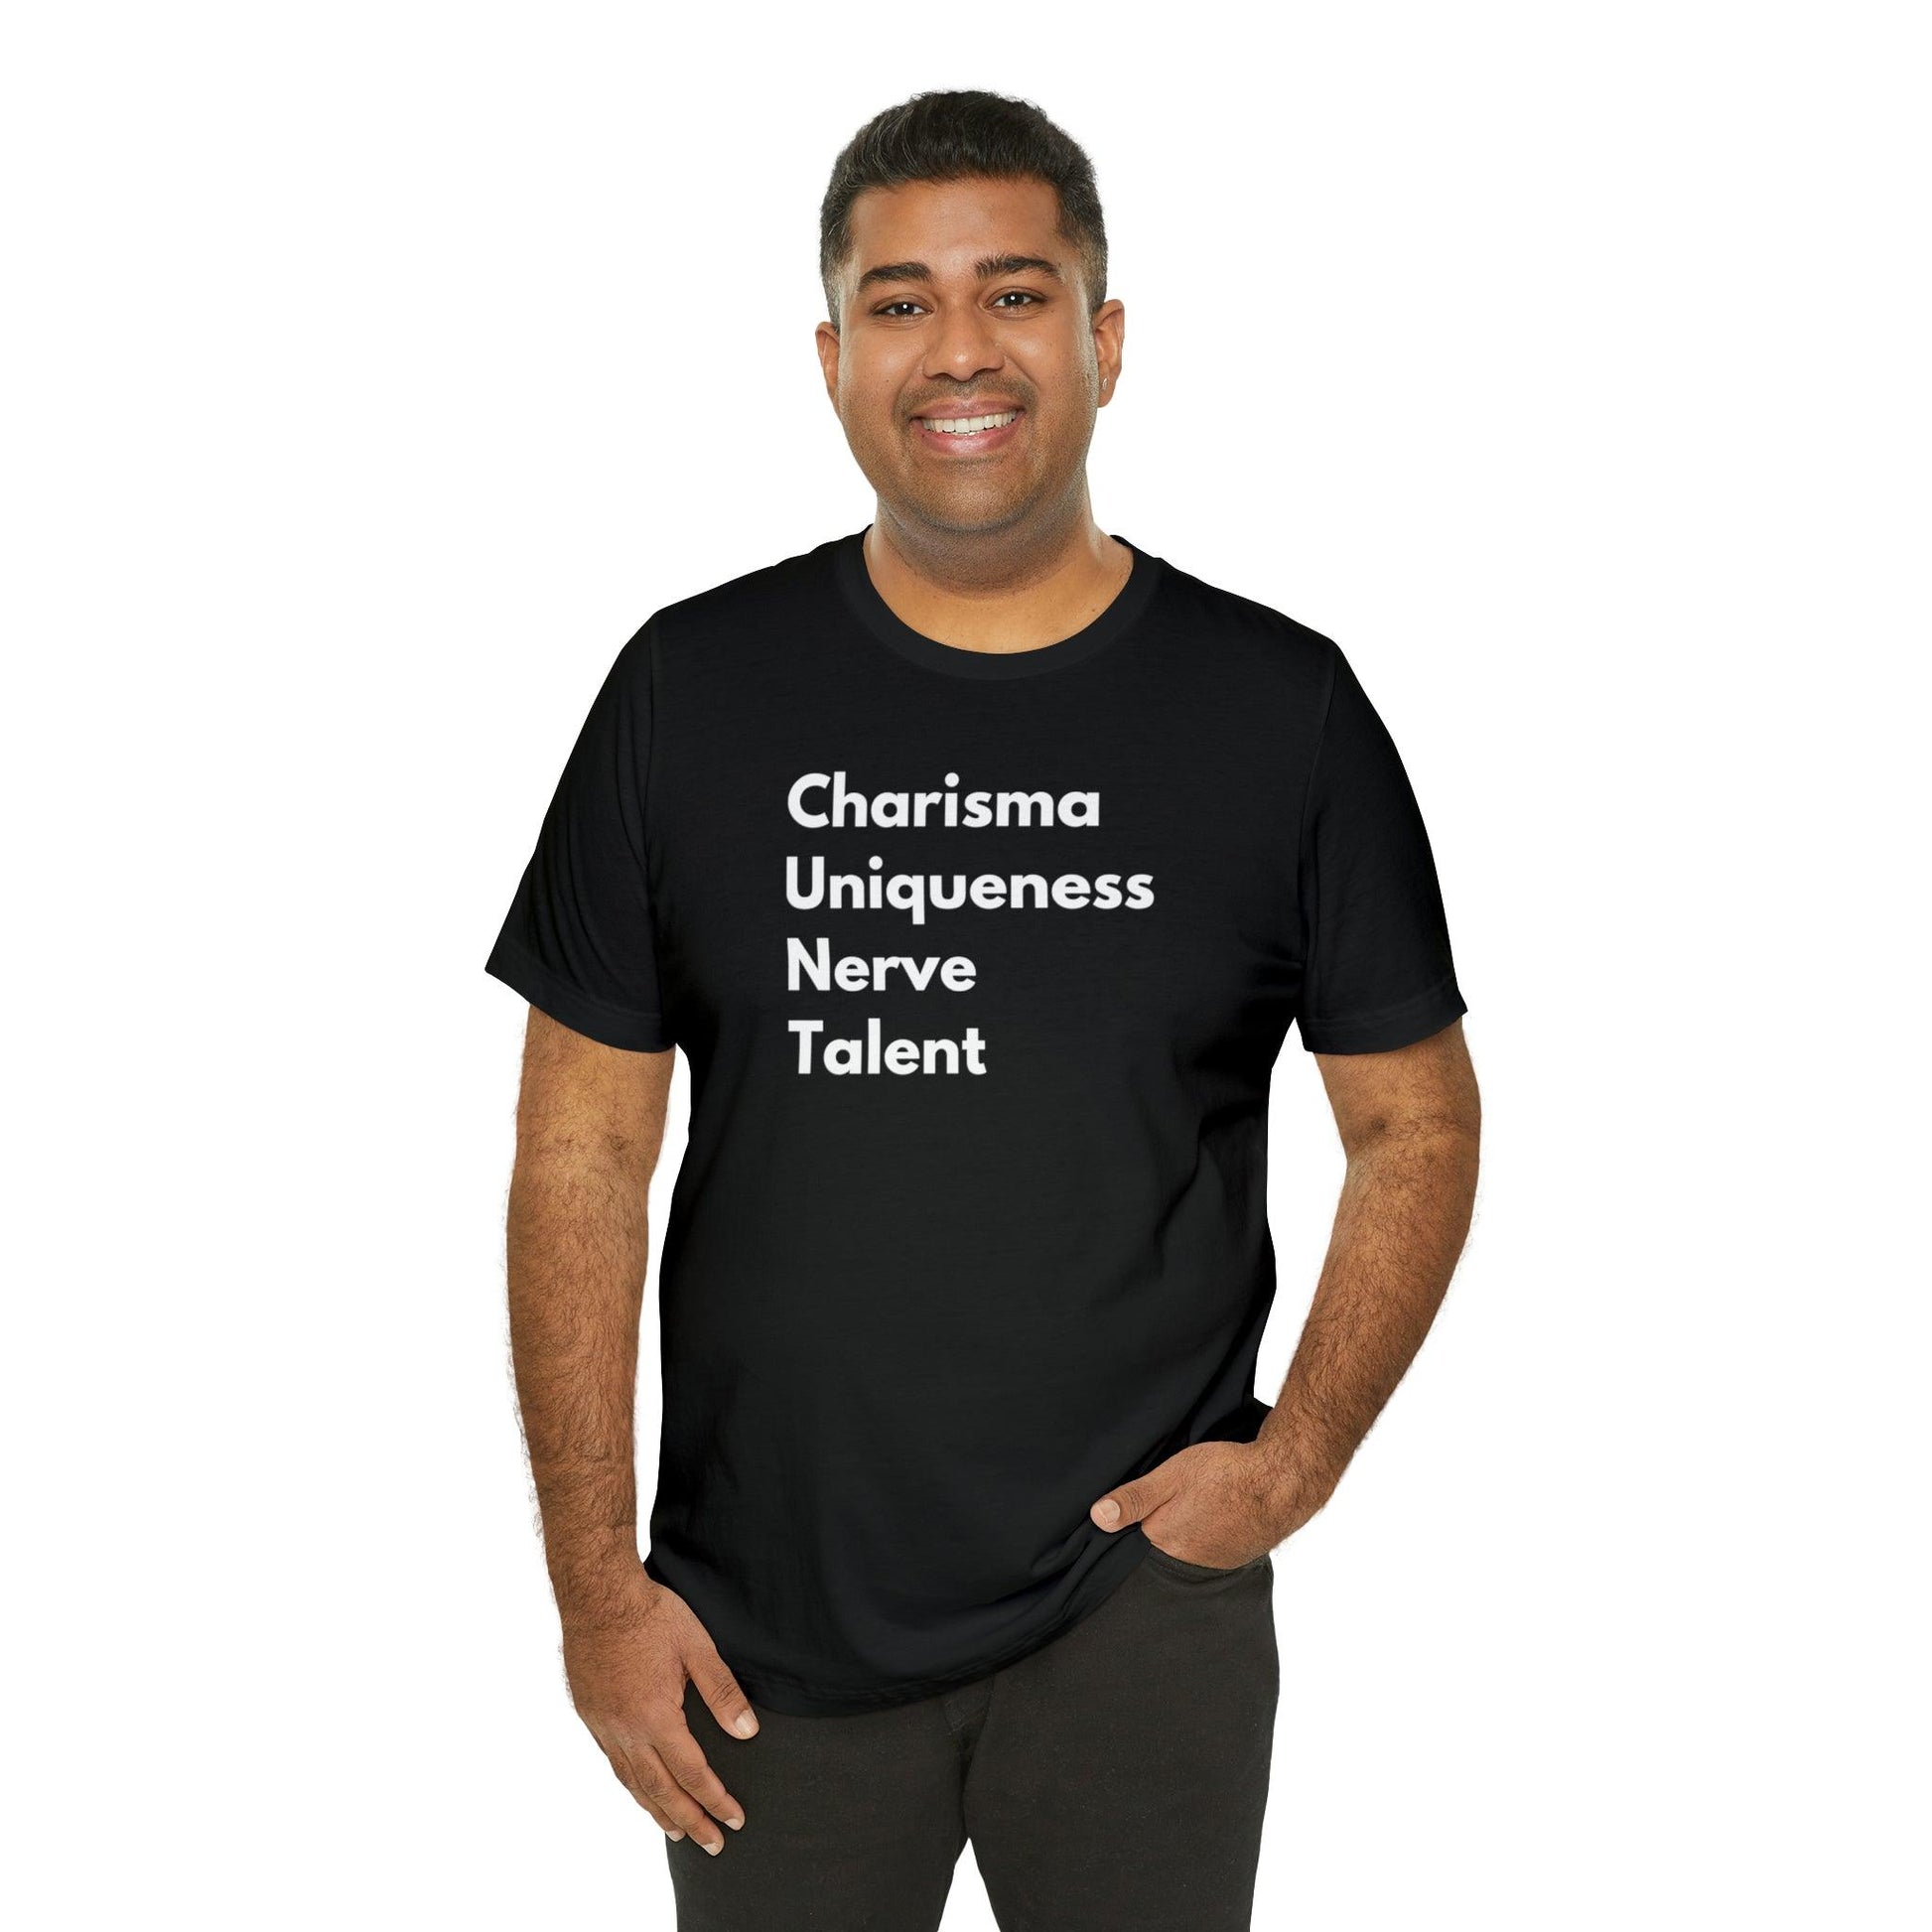 Charisma Uniqueness Nerve Talent (C.U.N.T.) - Wicked Naughty Apparel